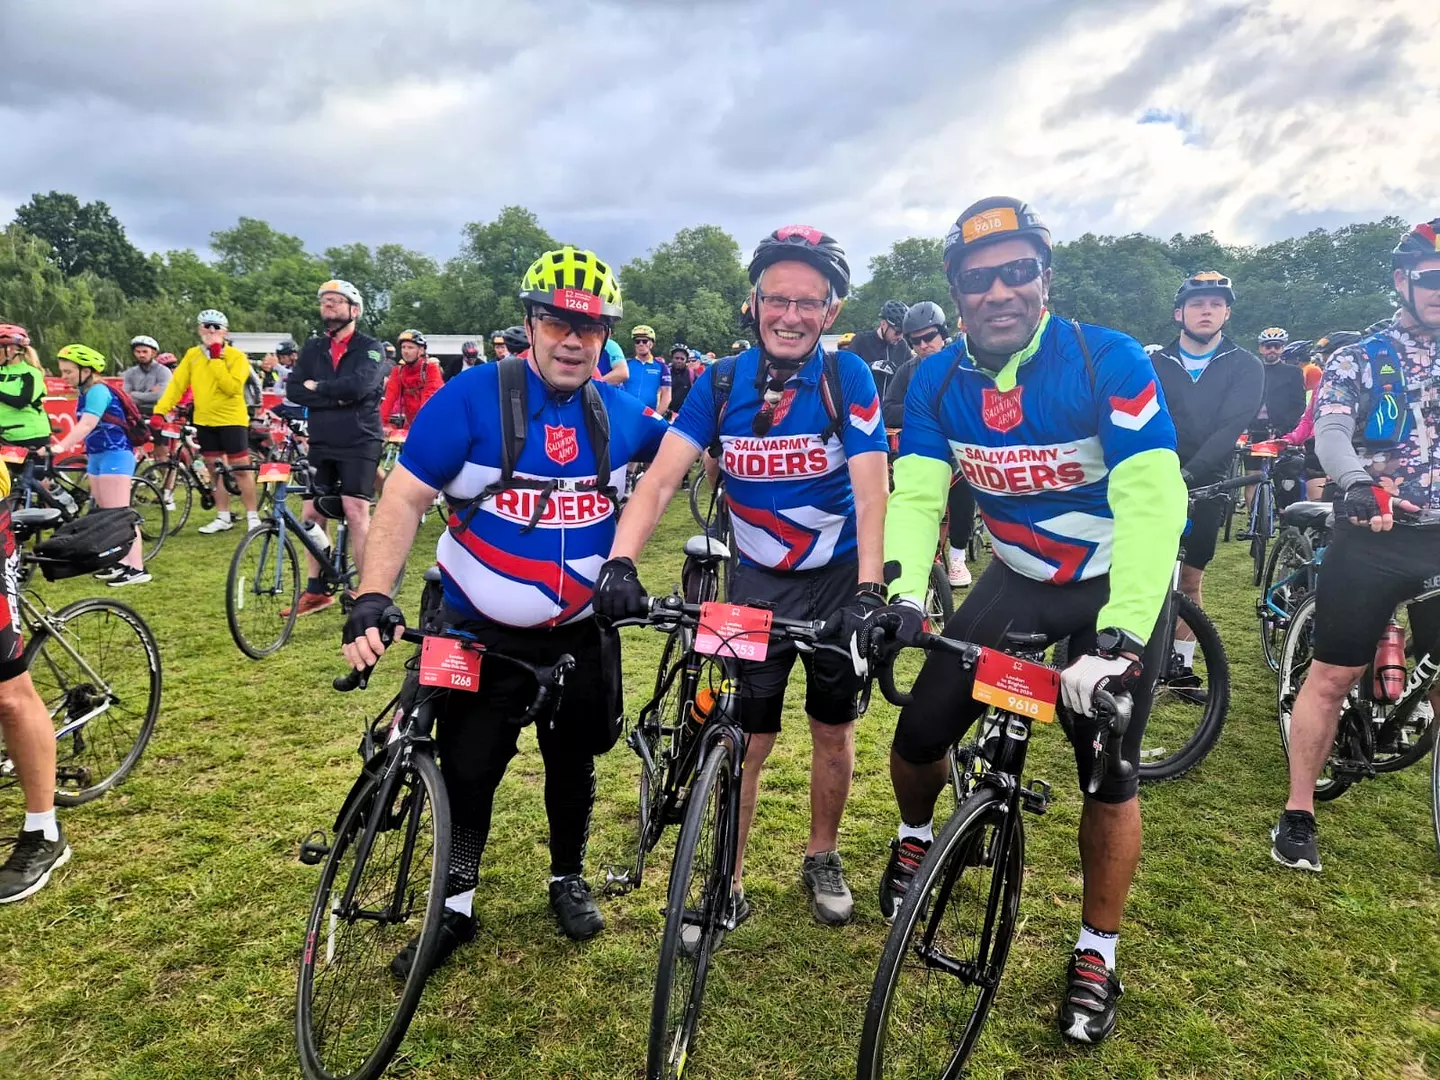 Ex-footballer Les Ferdinand, Ricky, and Roy gathered on their bikes at the start of the London to Brighton cycle.